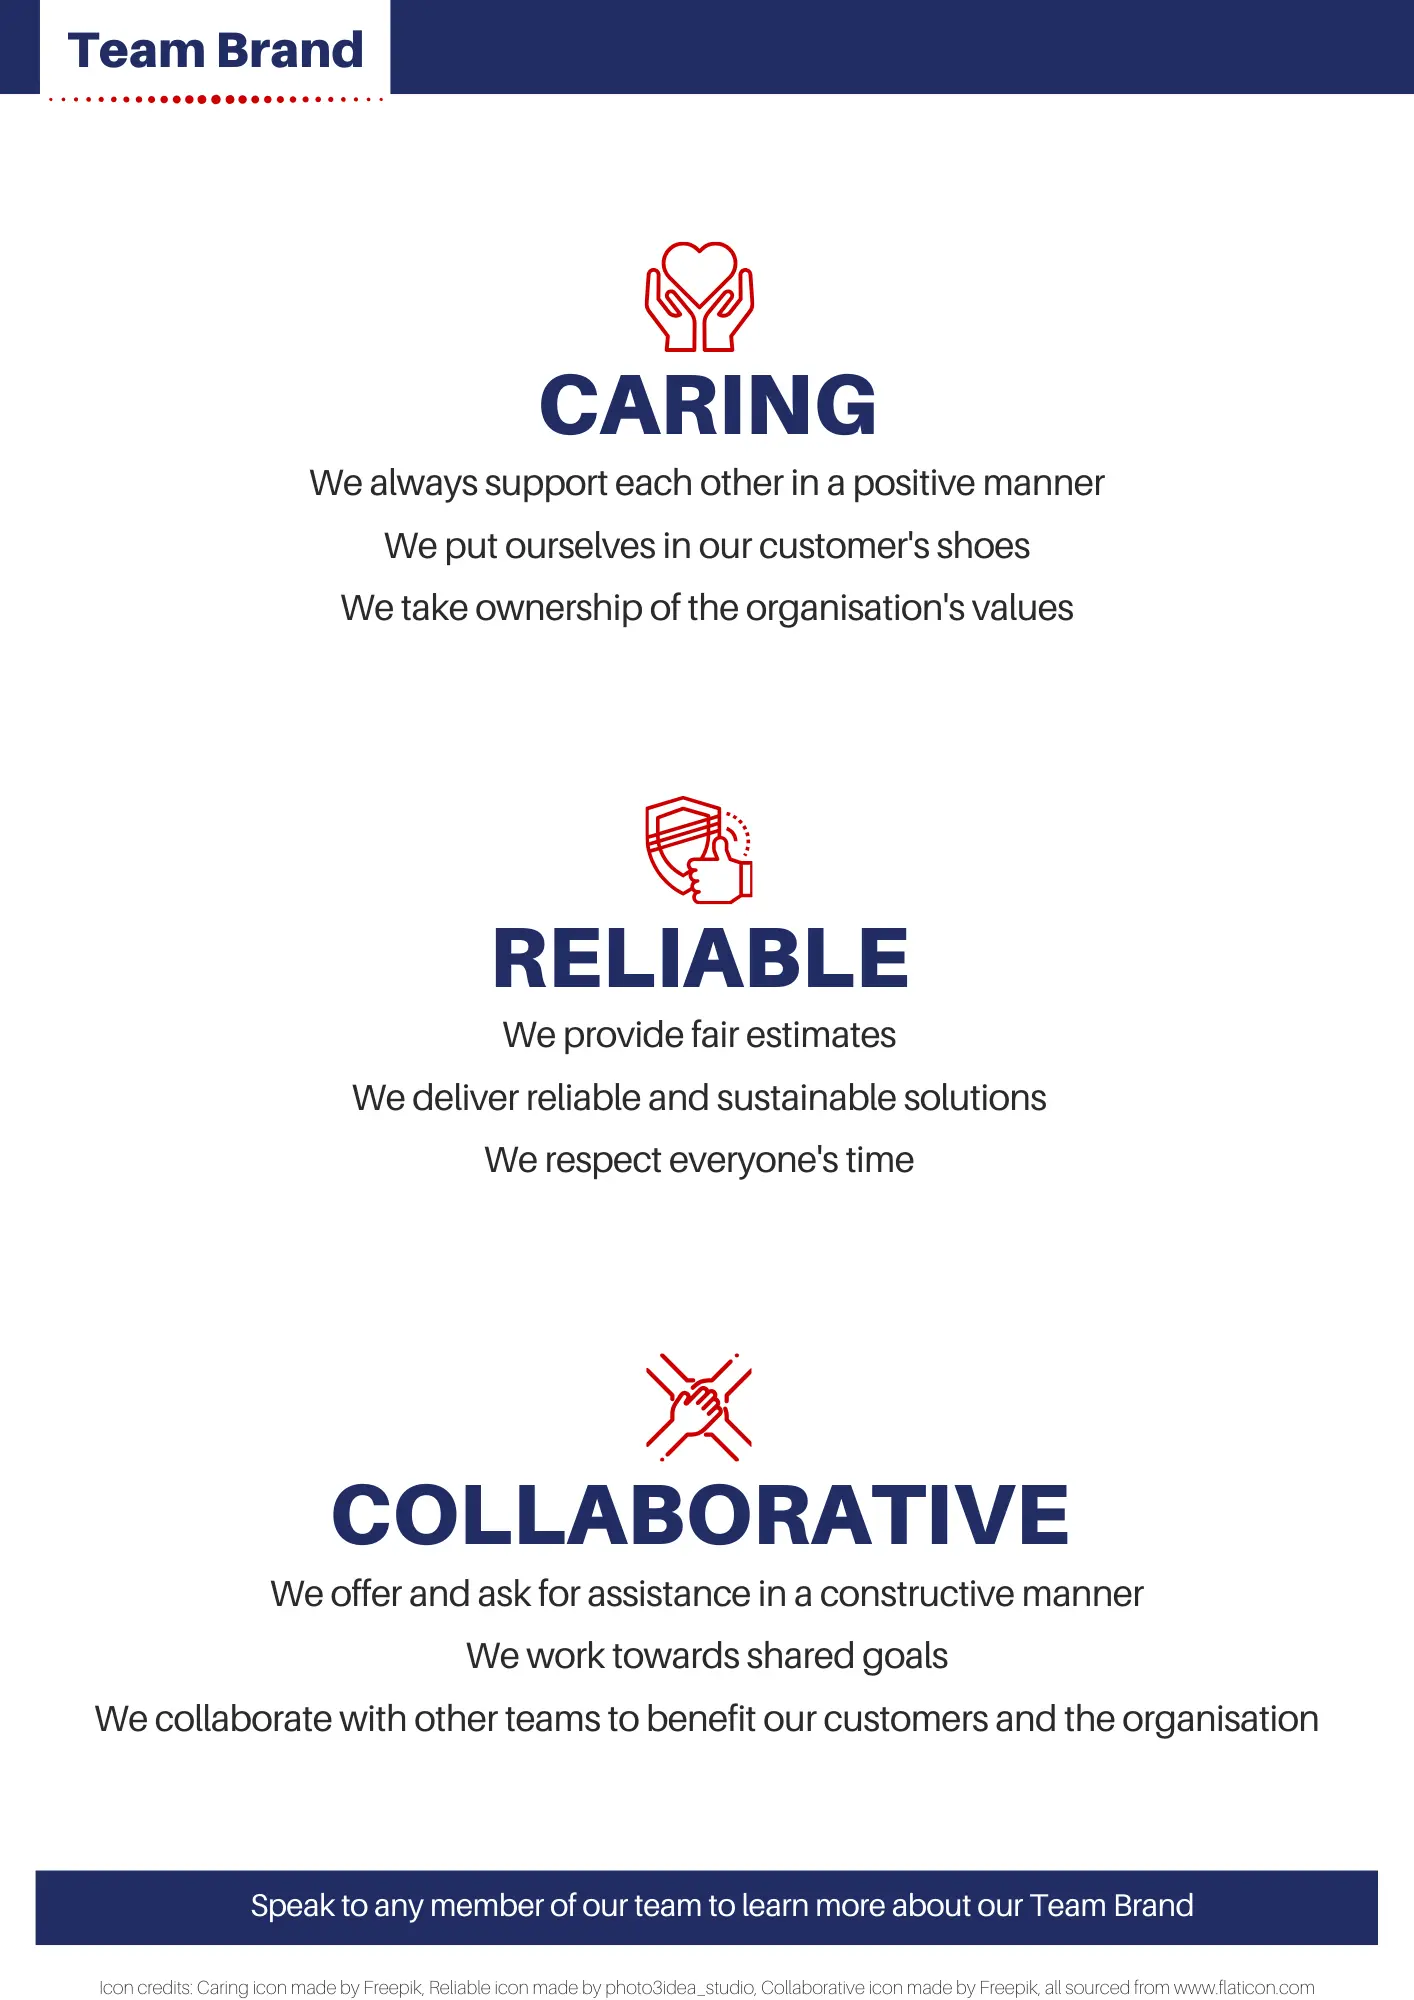 Team Brand poster with headings of Caring, Reliable, and Collaborative